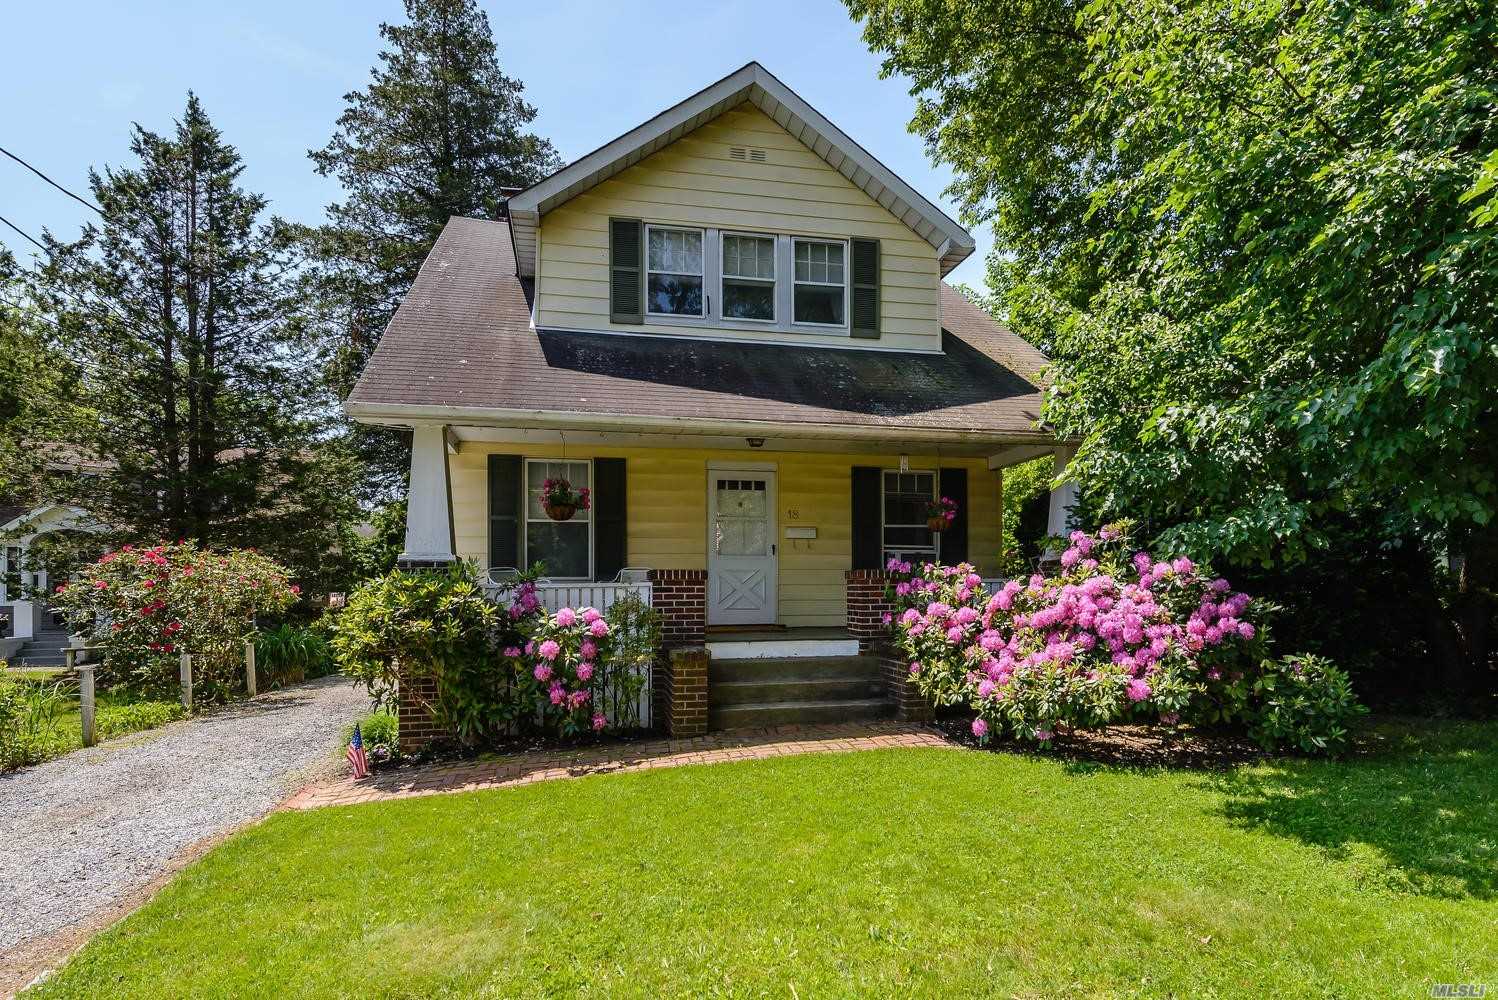 Charming Village Bungalow Style Residence With Lovely And Very Private Backyard On A Quiet Street. Large Basement And Attic Offer Great Storage. Convenient Location-Beach Not Far Away. Appliances As Is. Huntington School District#3 ----------( Waiting For Interior Photos)